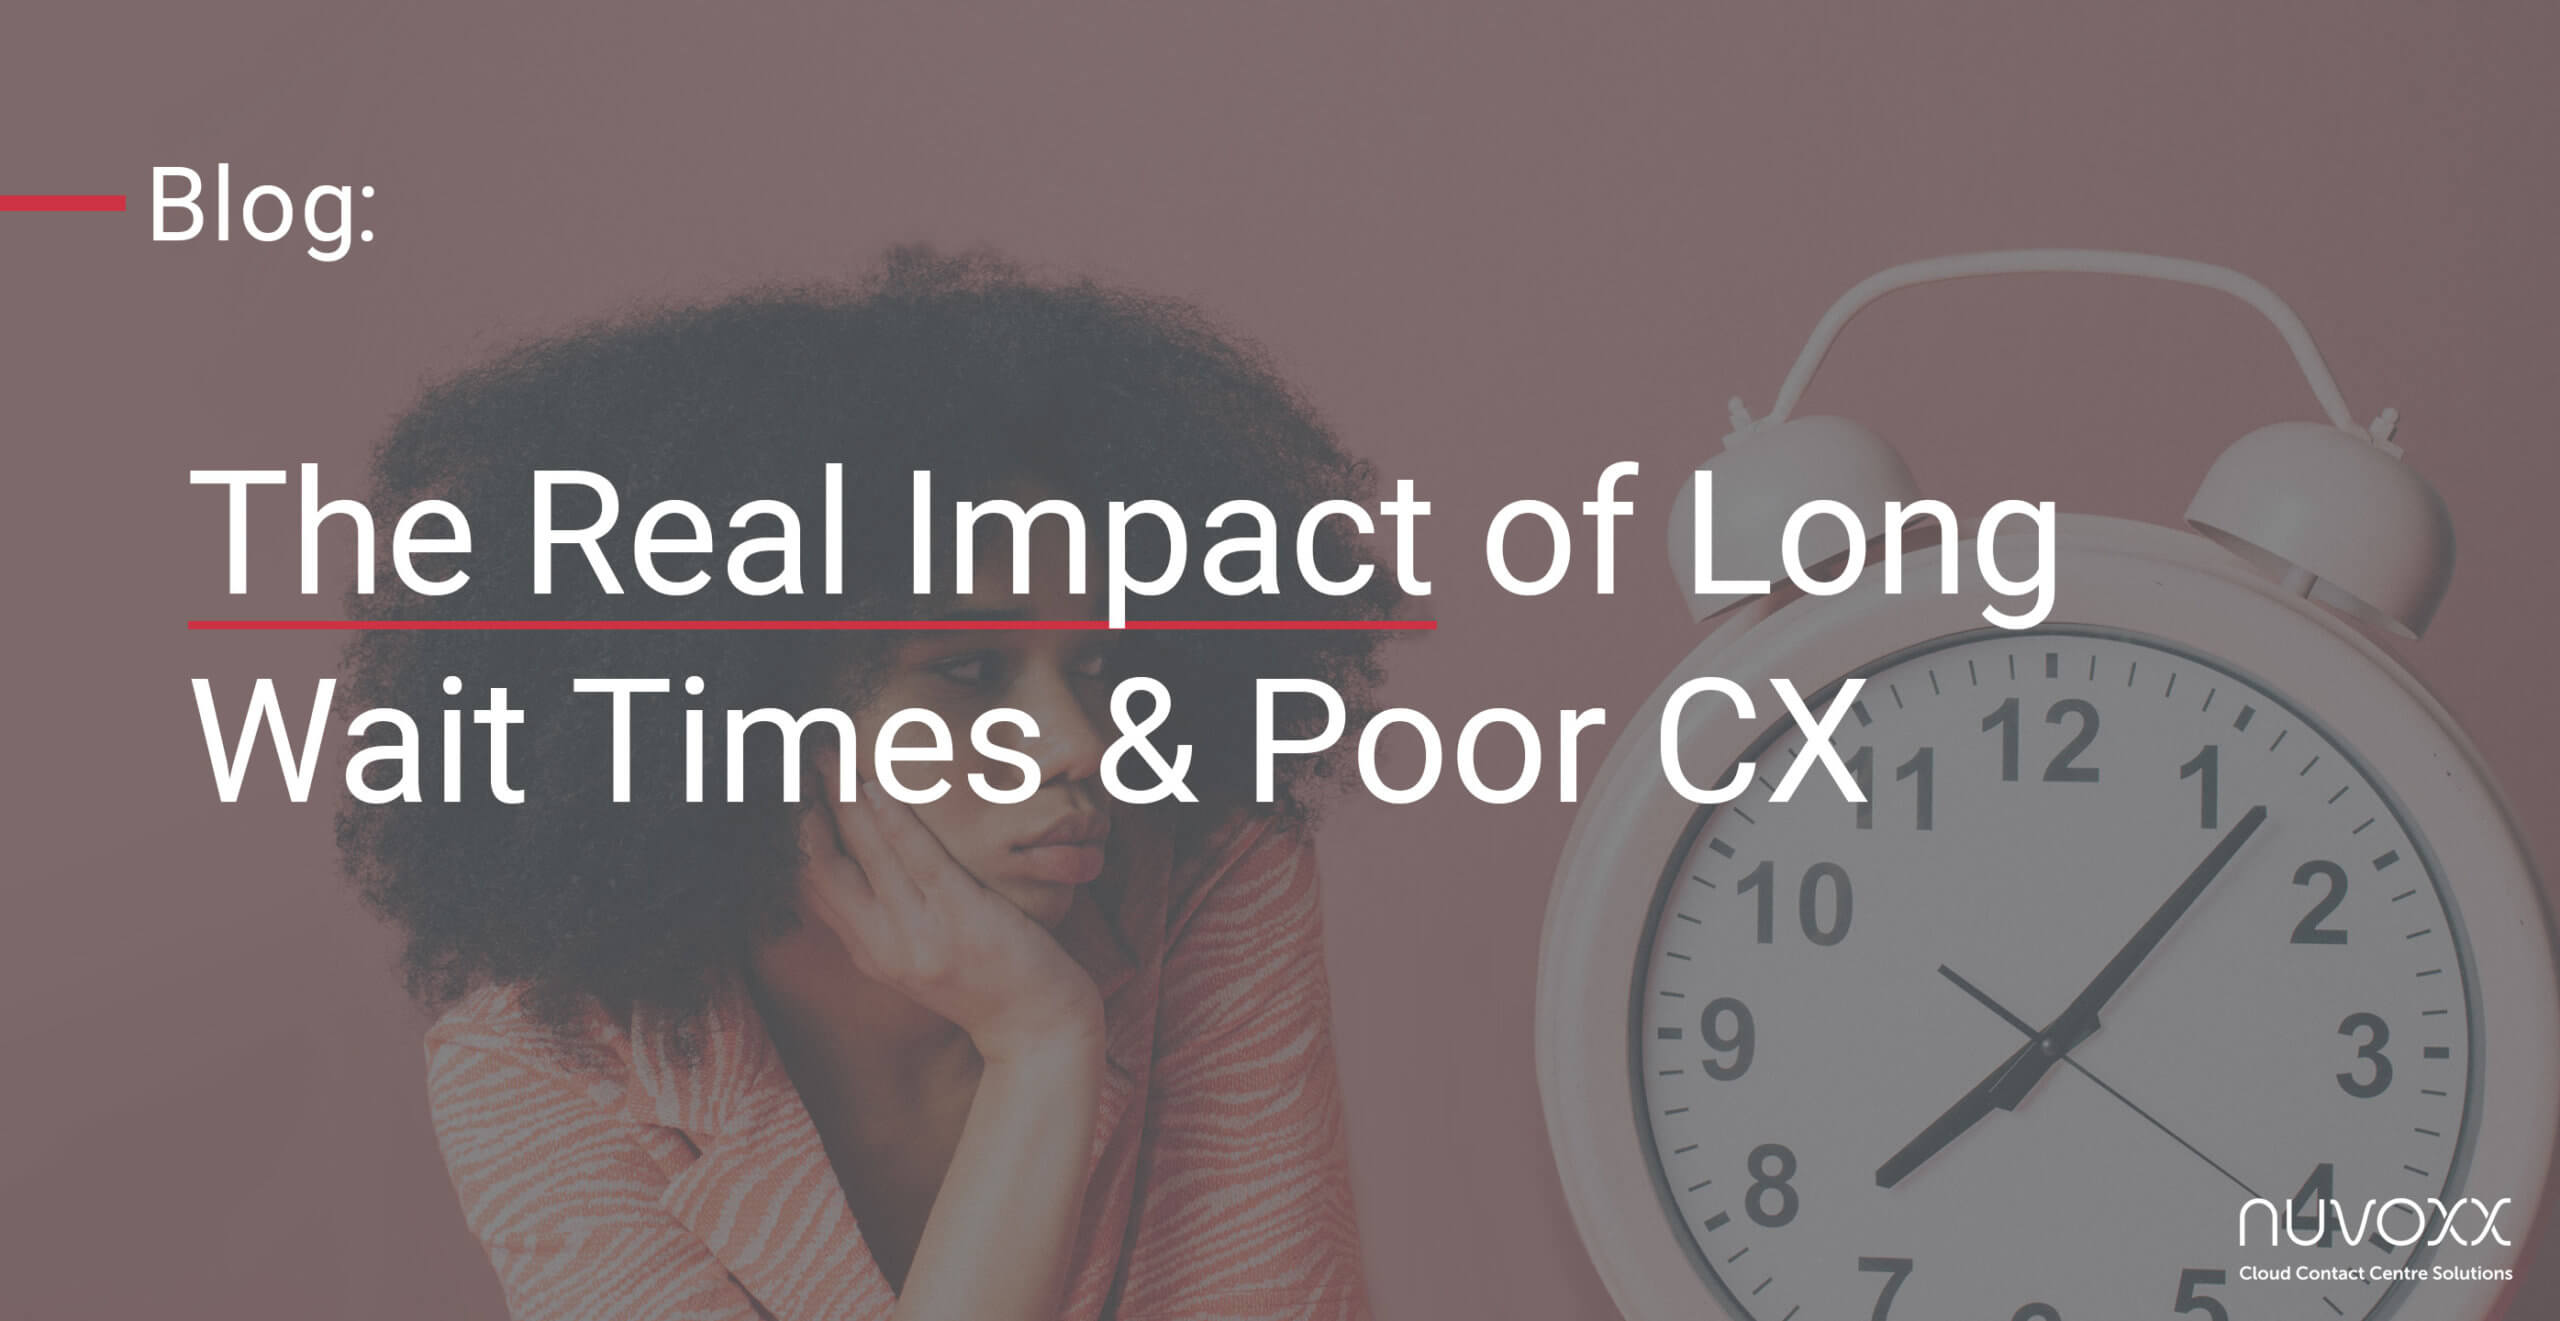 The Real Impact of Long Wait Times & Poor CX